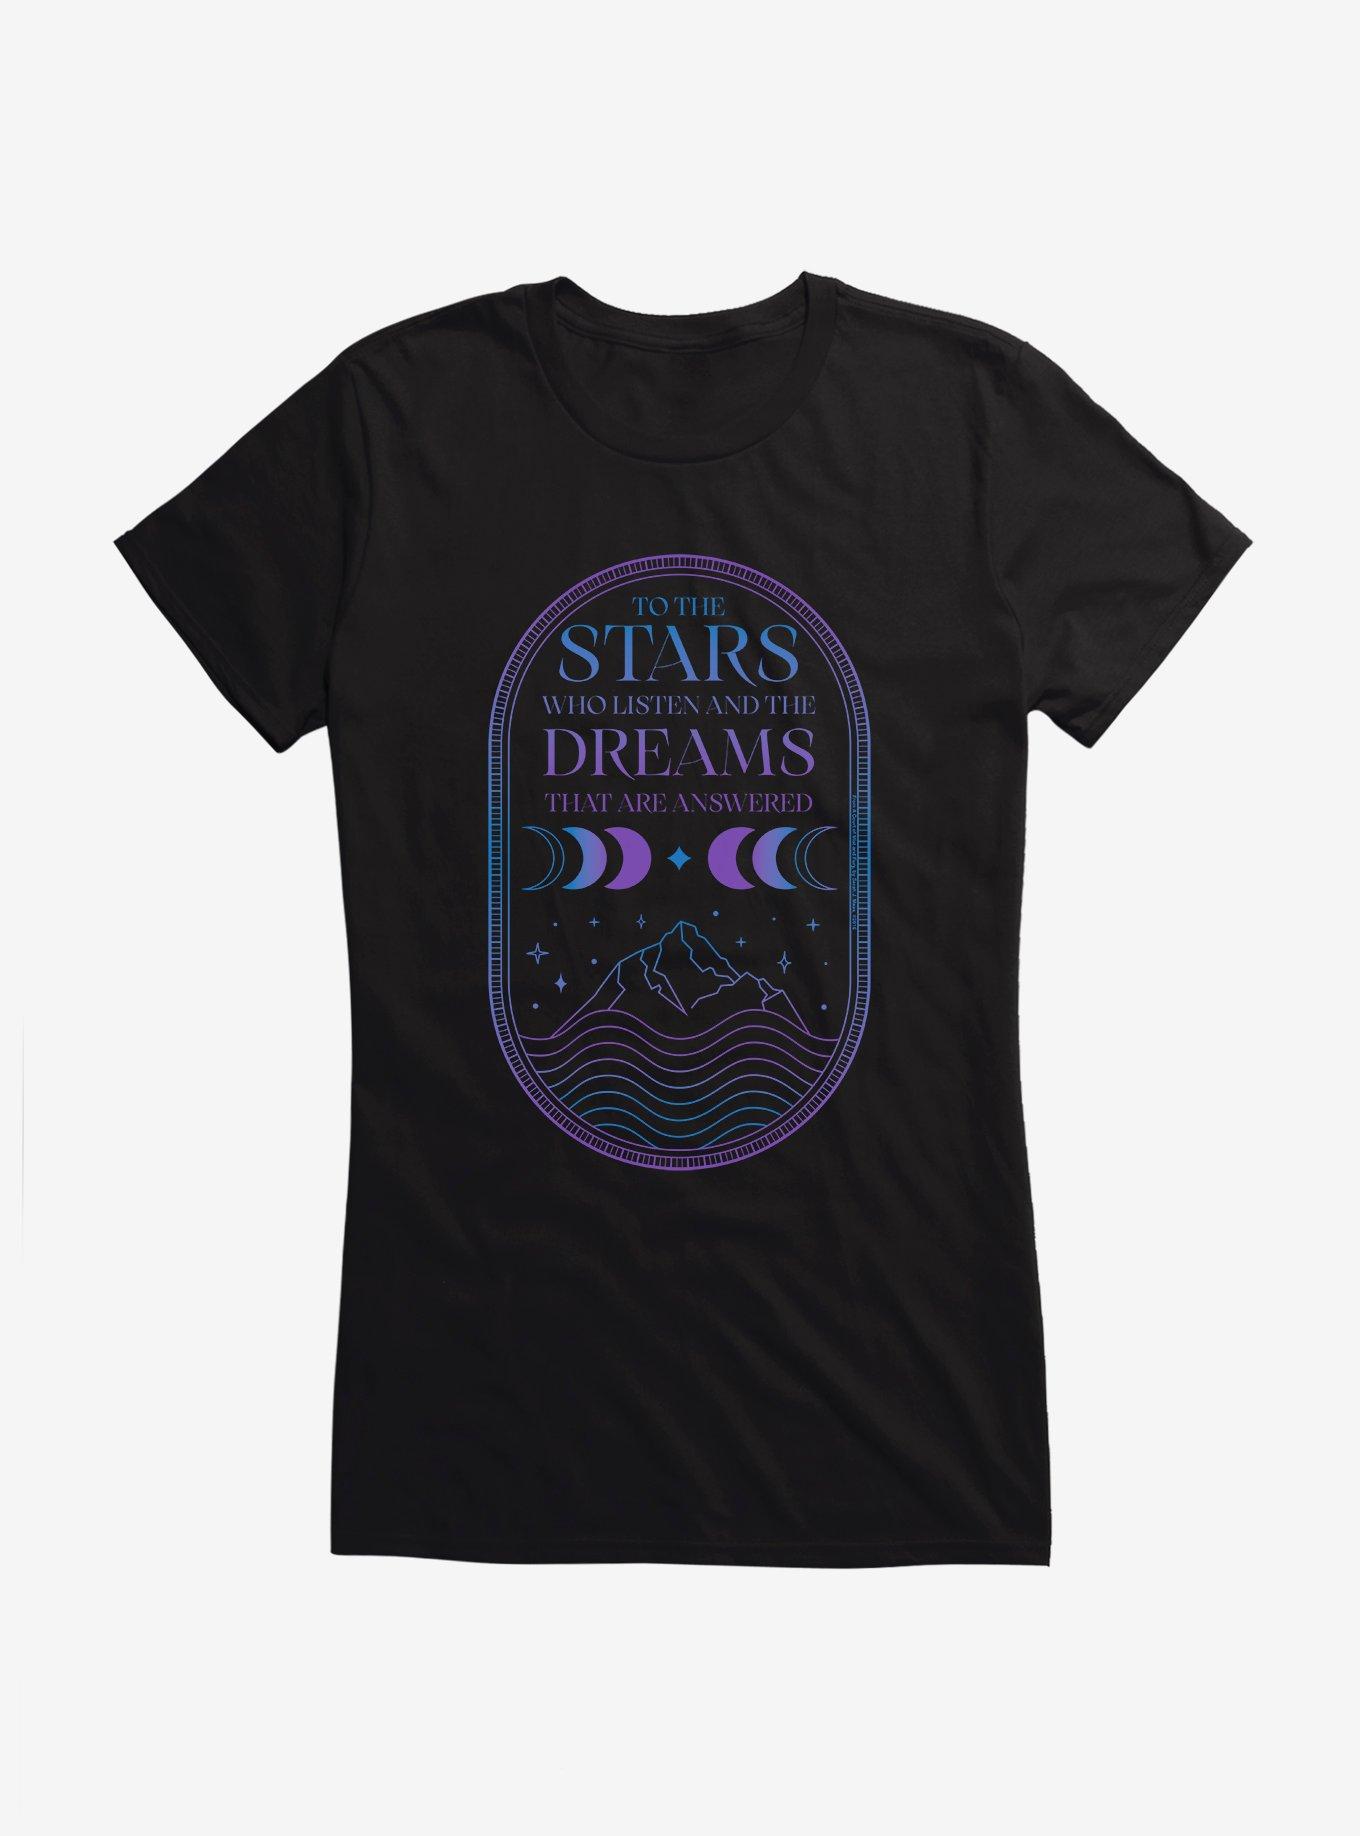 A Court Of Mist & Fury Stars And Dreams Girls T-Shirt